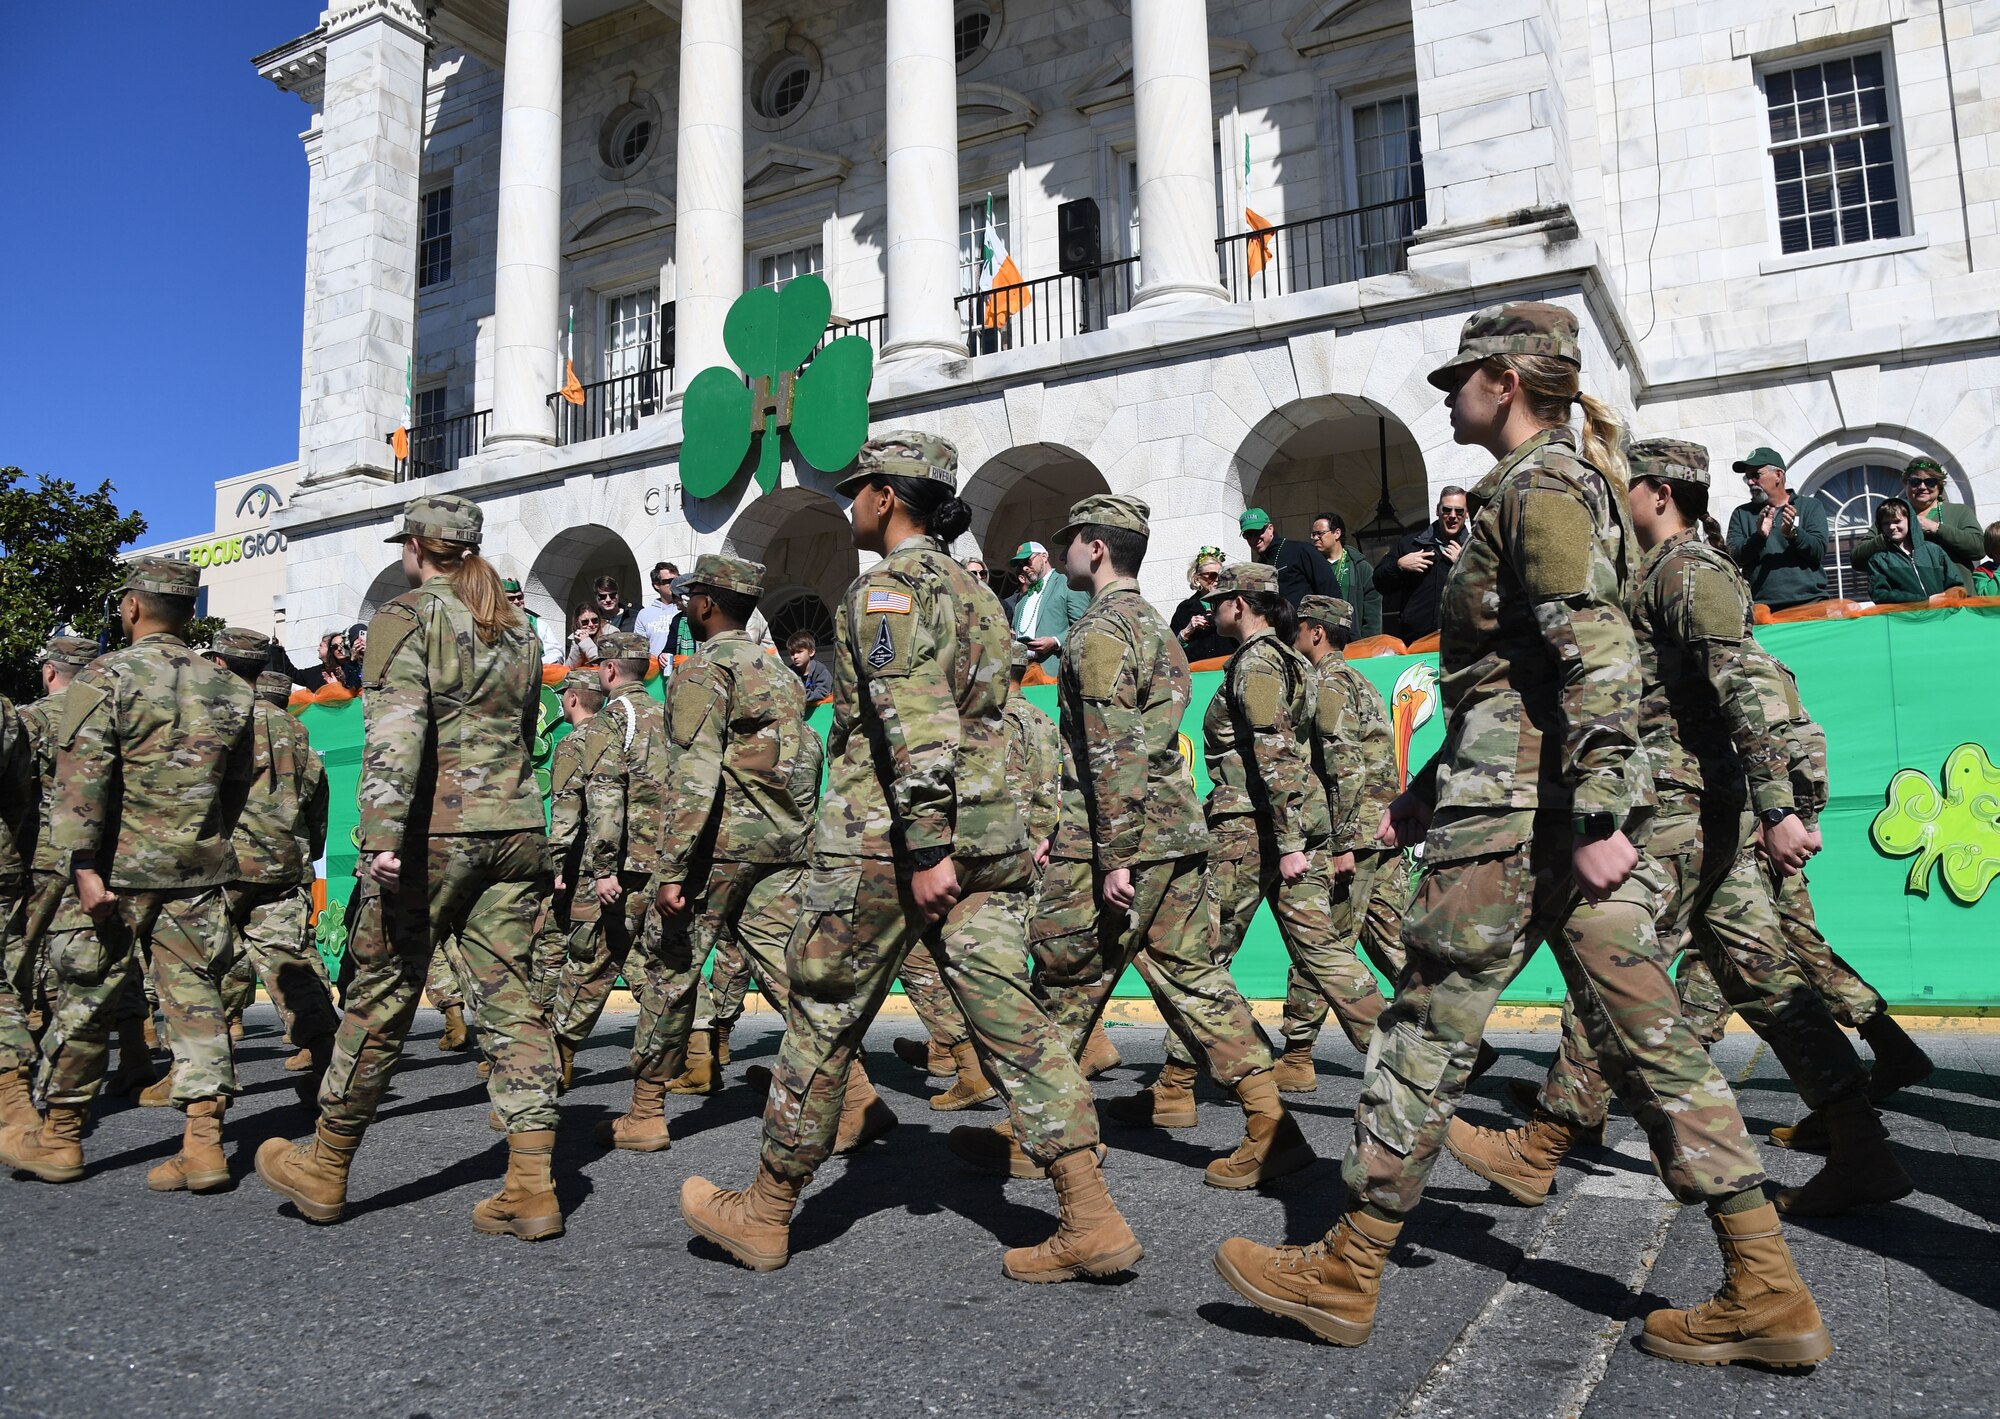 Airmen from the 81st Training Wing march through Biloxi during the Hibernia Marching Society of Mississippi St. Patrick's Day Parade in Biloxi, Mississippi, March 12, 2022. Keesler personnel participated in the local parade to show their support of the communities surrounding the installation. (U.S. Air Force photo by Kemberly Groue)